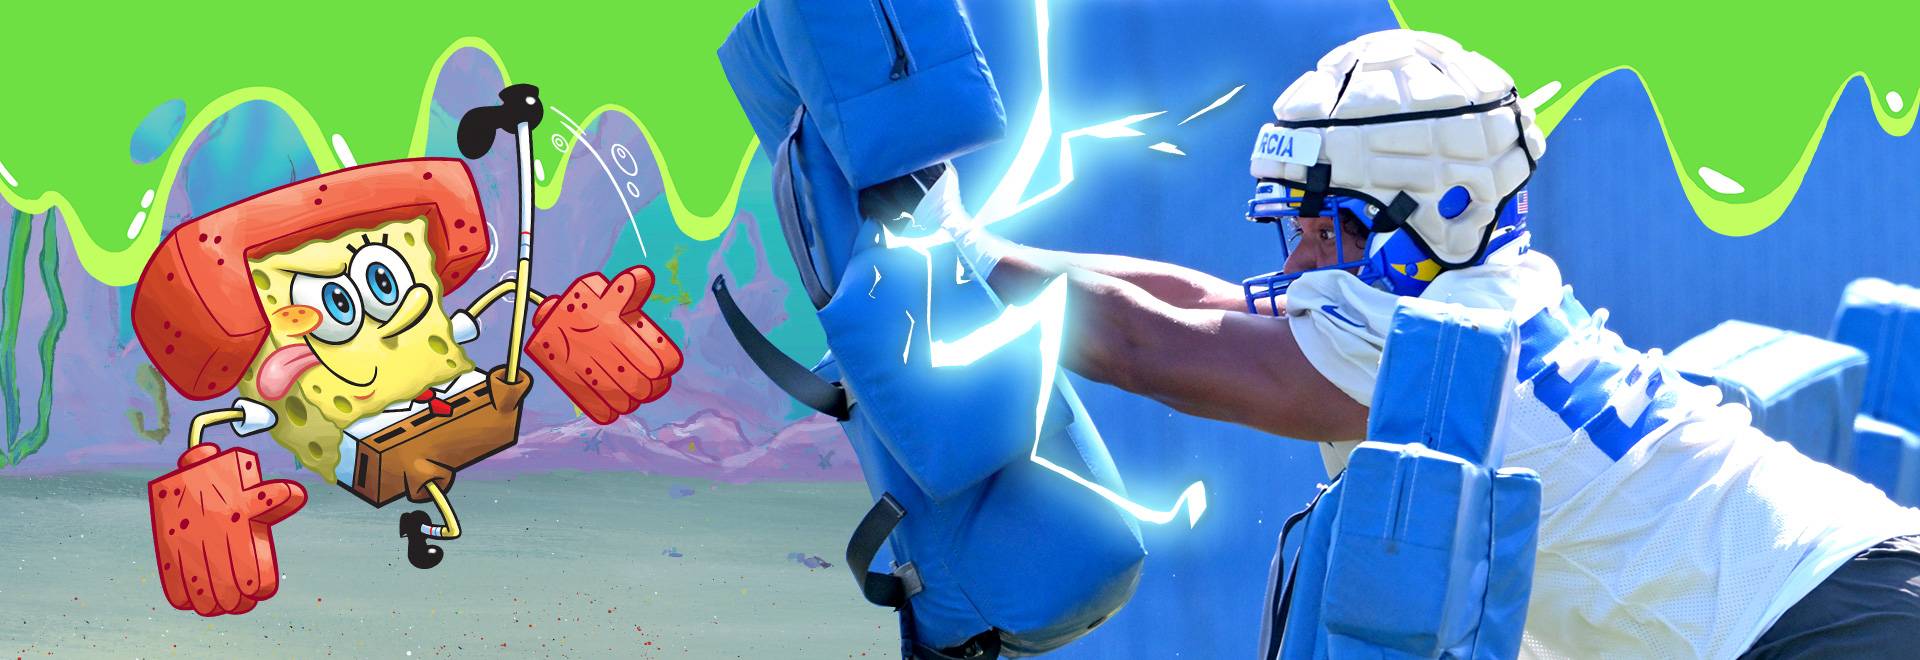 SpongeBob Squarepants in his red karate helmet and gloves, alongside Los Angeles Rams defensive tackle Aaron Donald hitting a padded sled while wearing a new Guardian Cap.